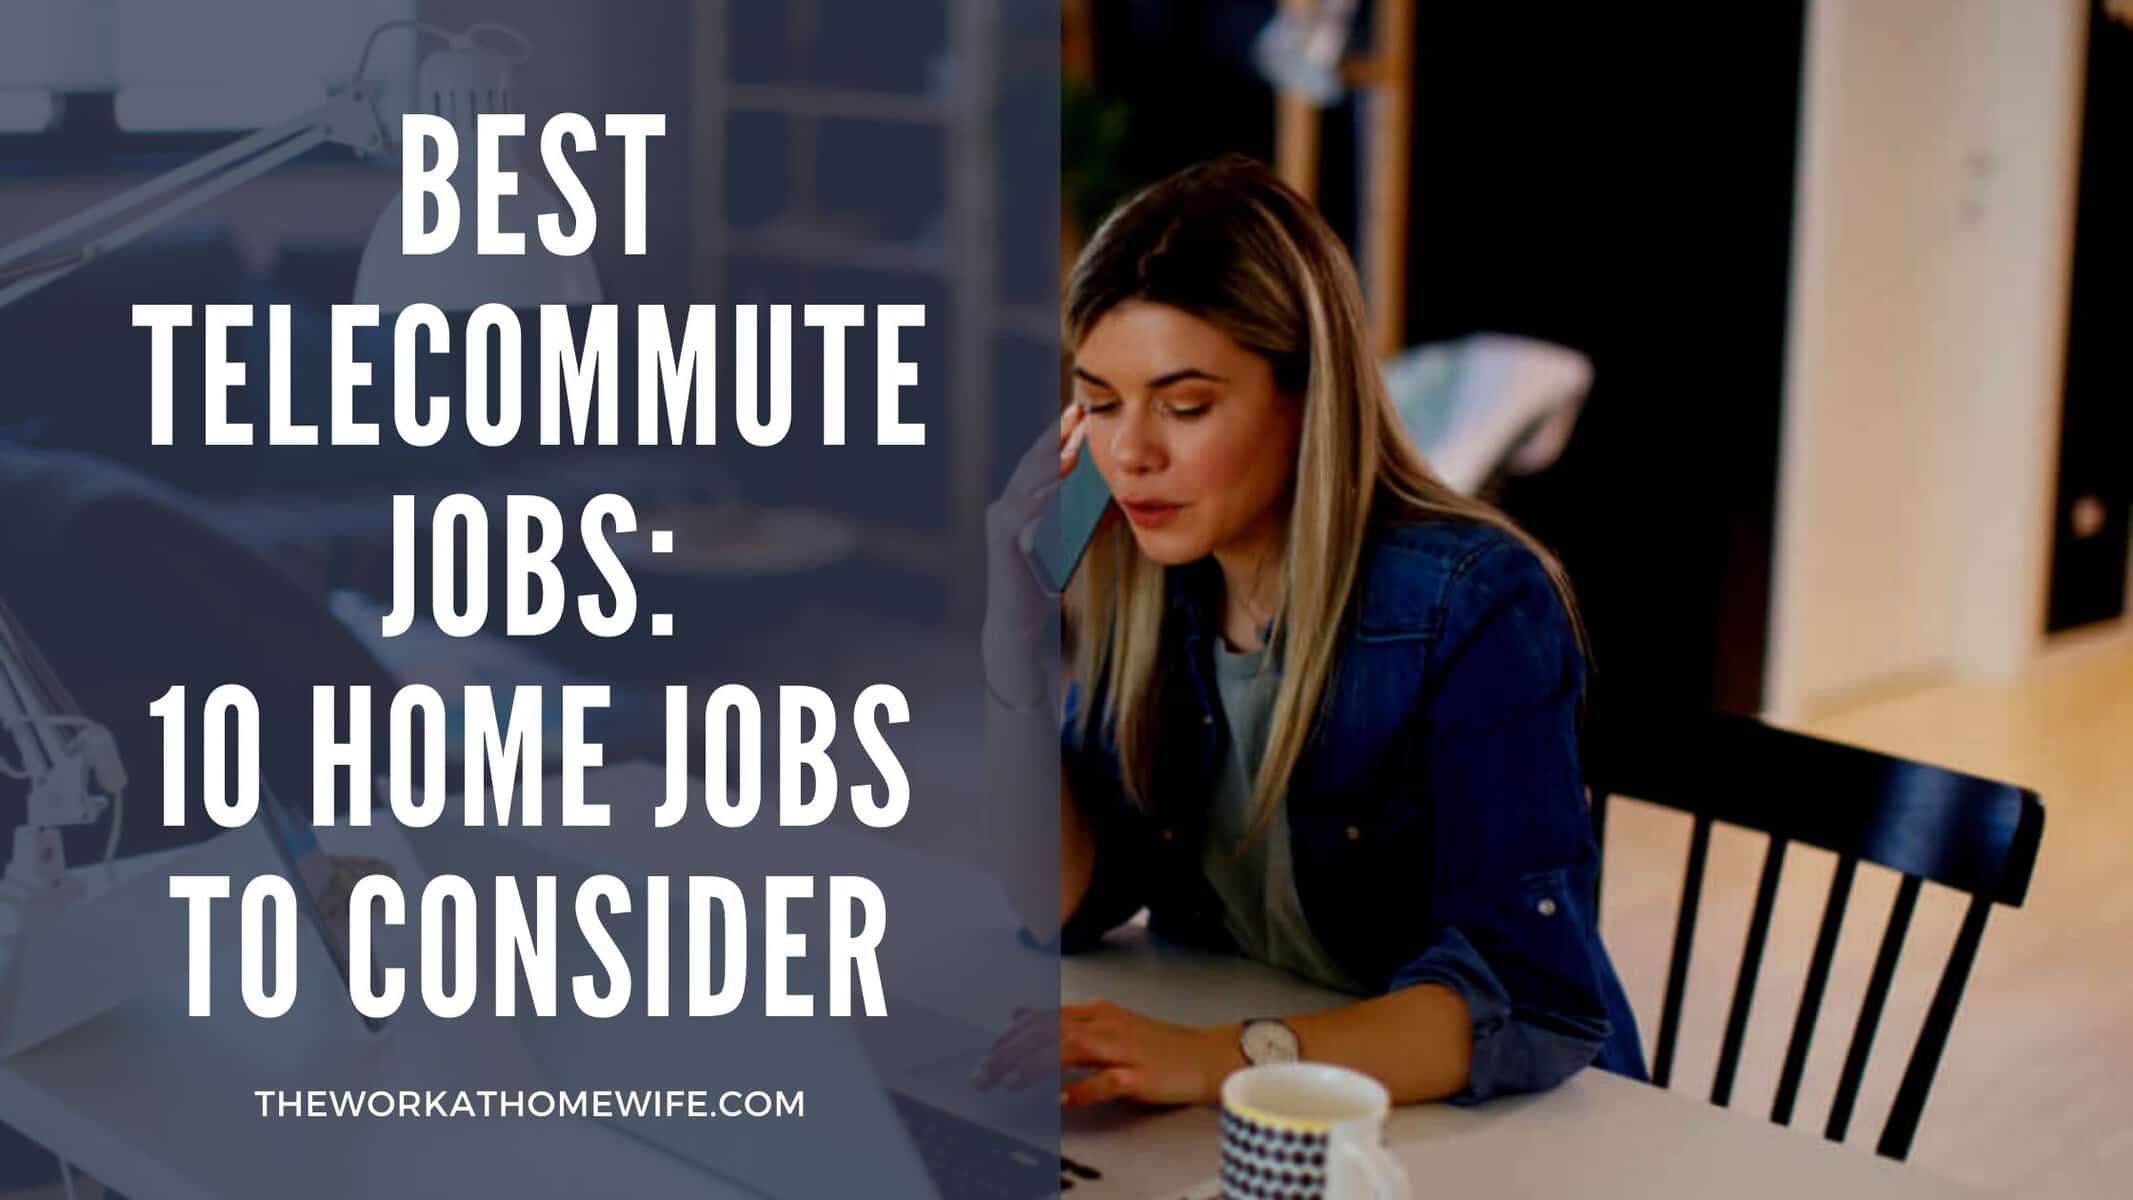 Who wrote the best jobs for telecommuting